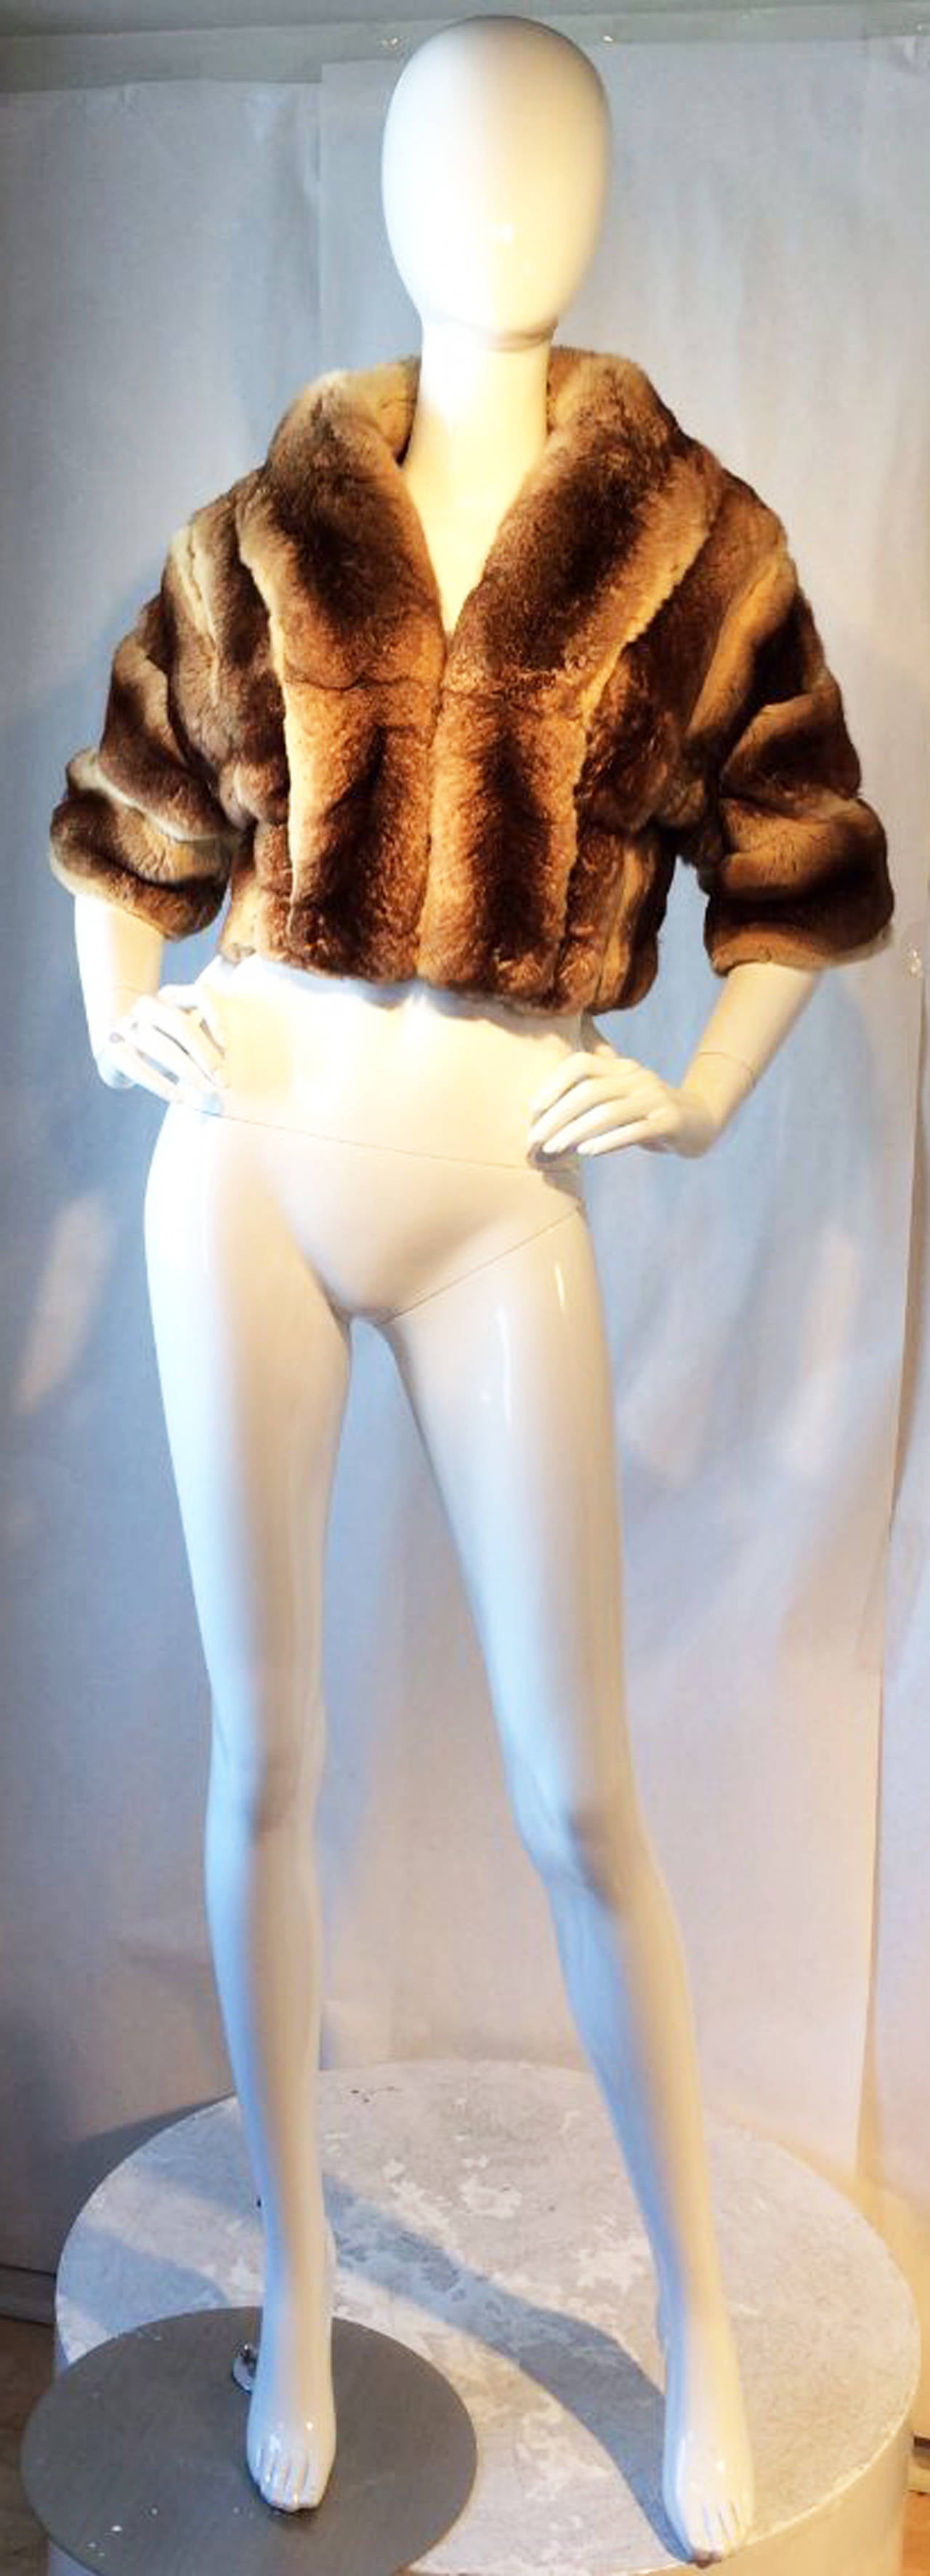 A fine and rare Michael Kors couture chinchilla shrug jacket. Authentic custom order item in a rare mocha dyed chinchilla fur. Item features matching fur attached collar and cuffs, fully silk lined with hidden hook closures. Pristine appears unworn.